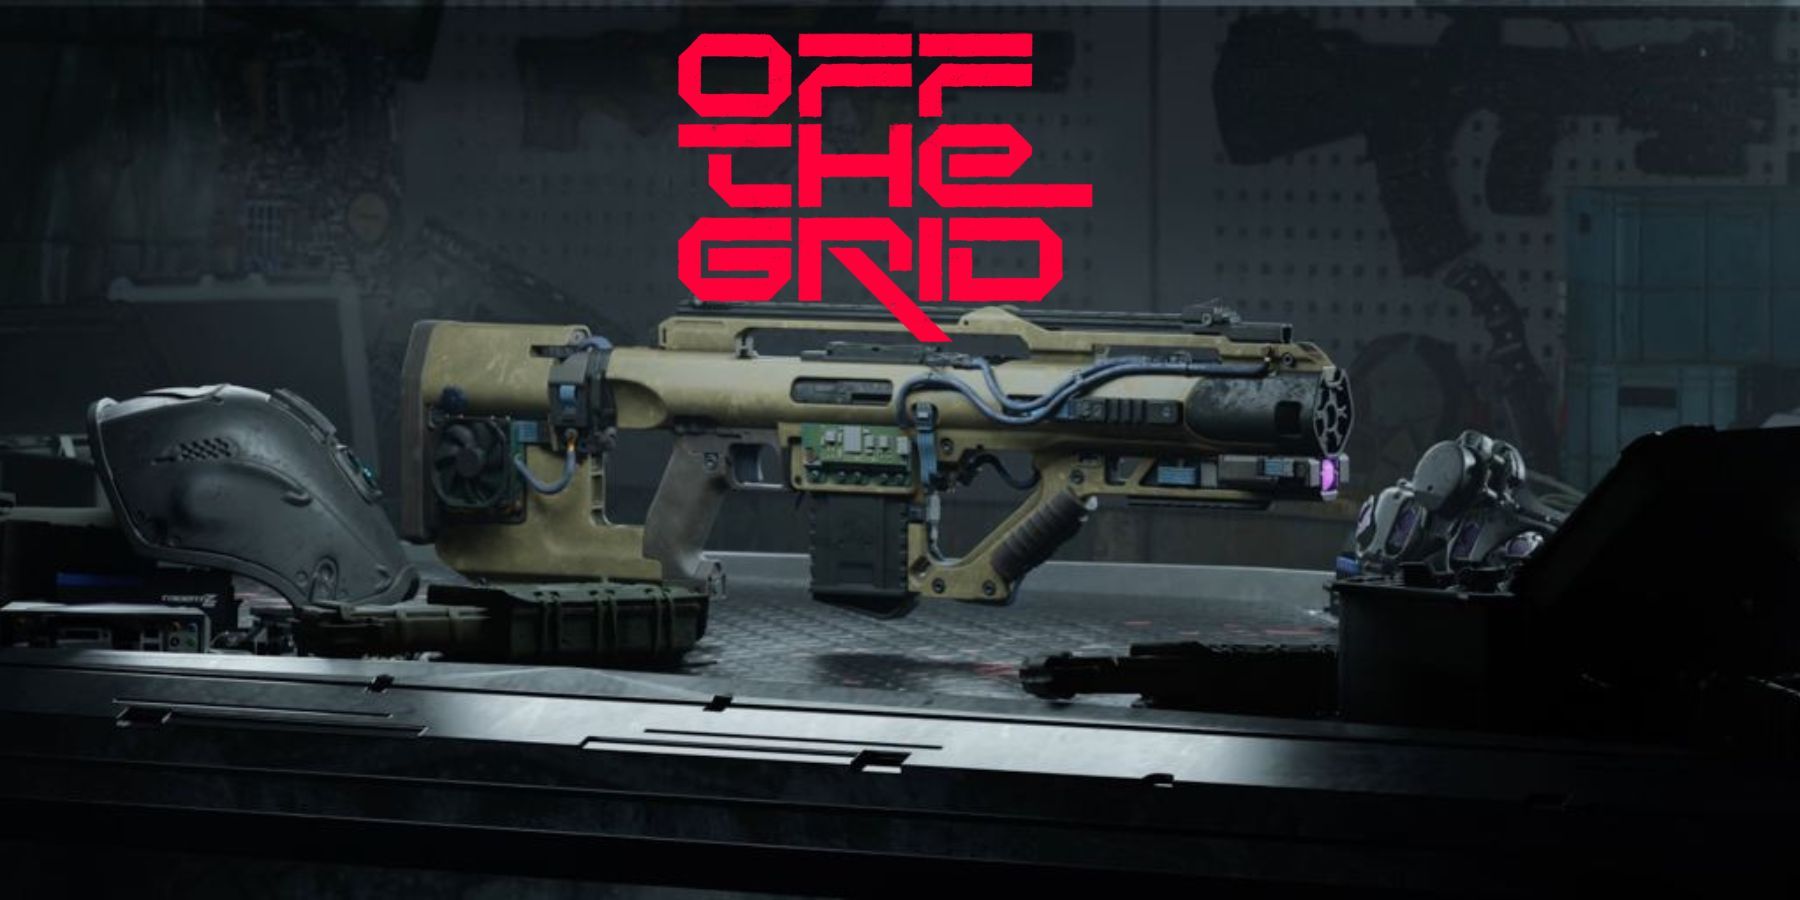 off the grid weapon